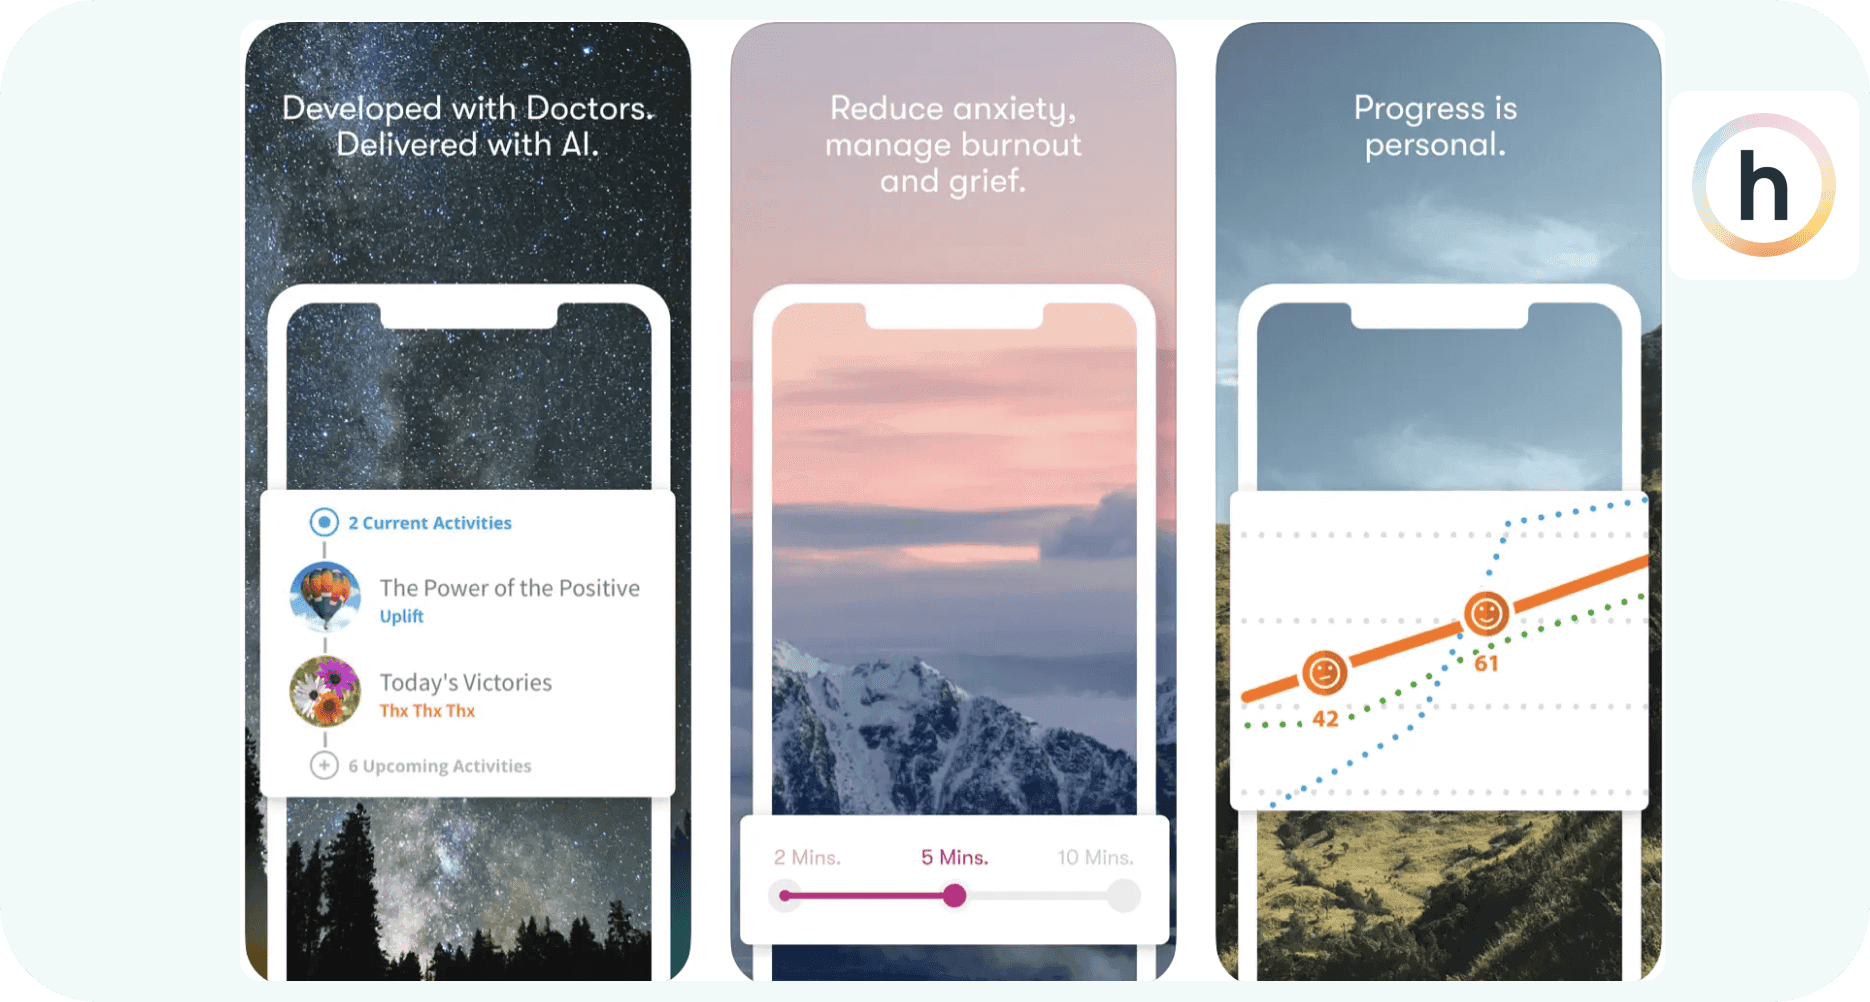 App screenshots from AppStore for Happify featuring self improvement features